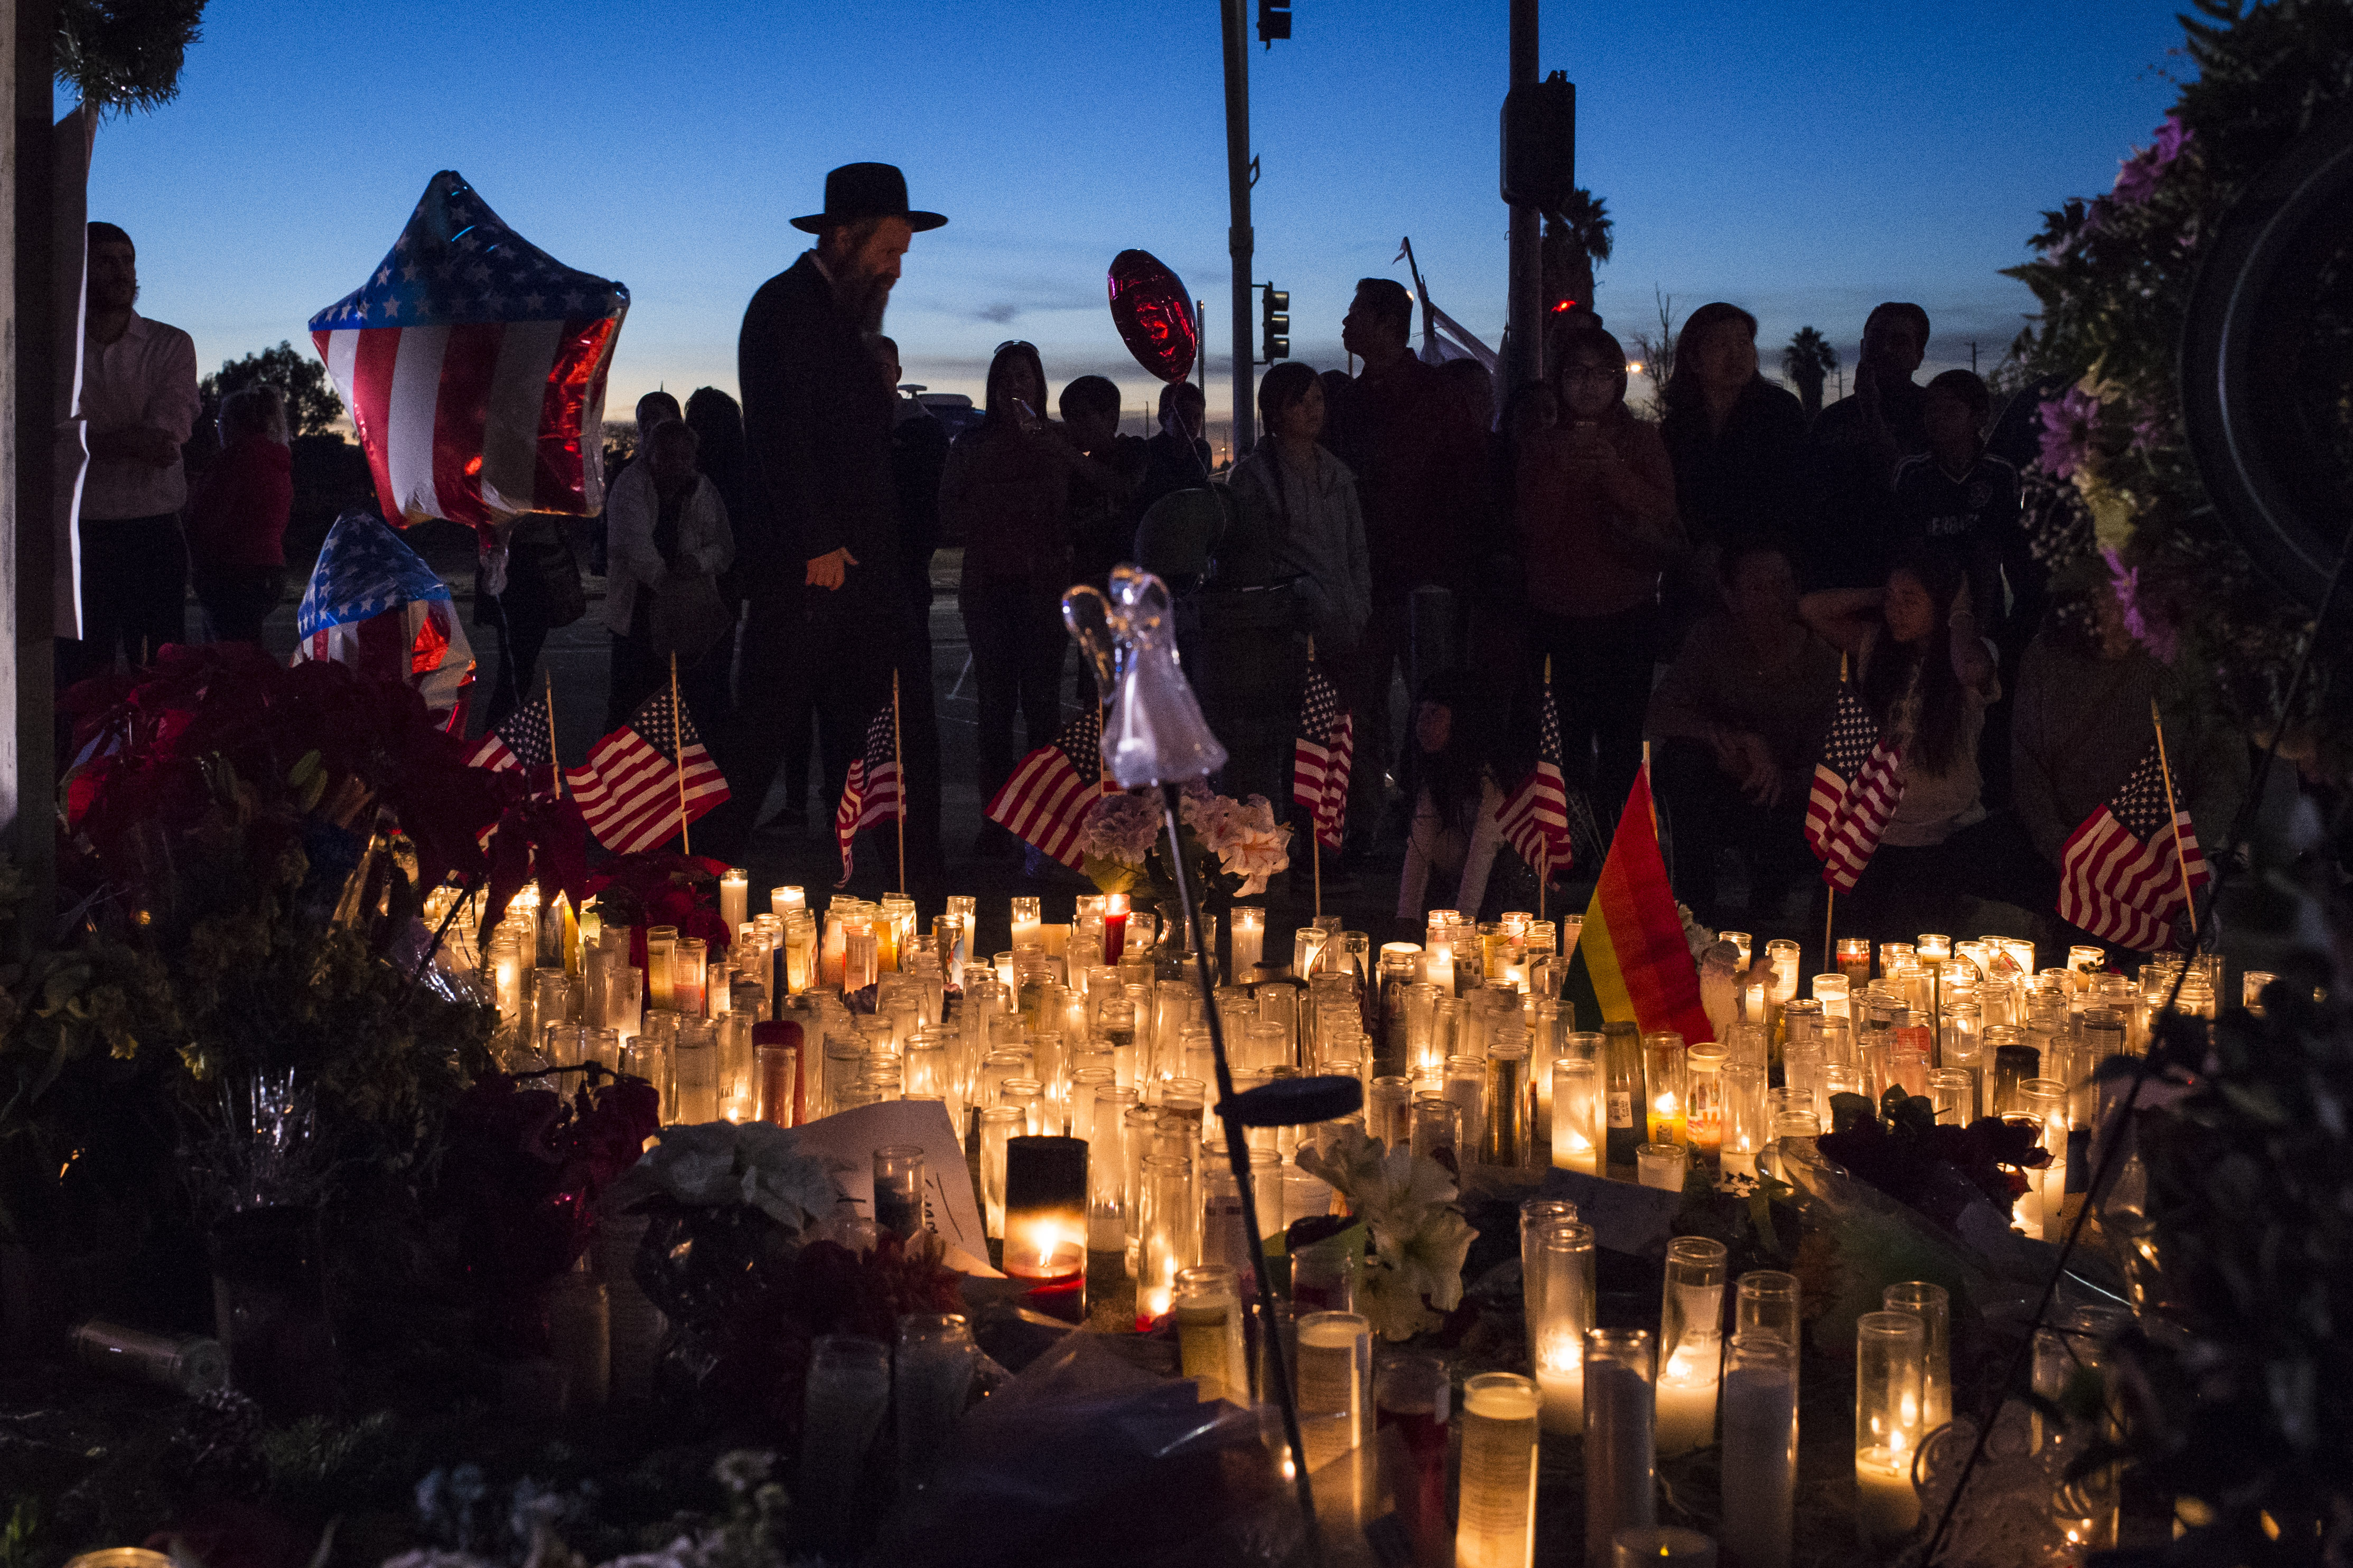 People pay their respects near the location of the mass shooting in San Bernardino, CA, on Dec. 6, 2015. (Jabin Botsford—The Washington Post/Getty Images)